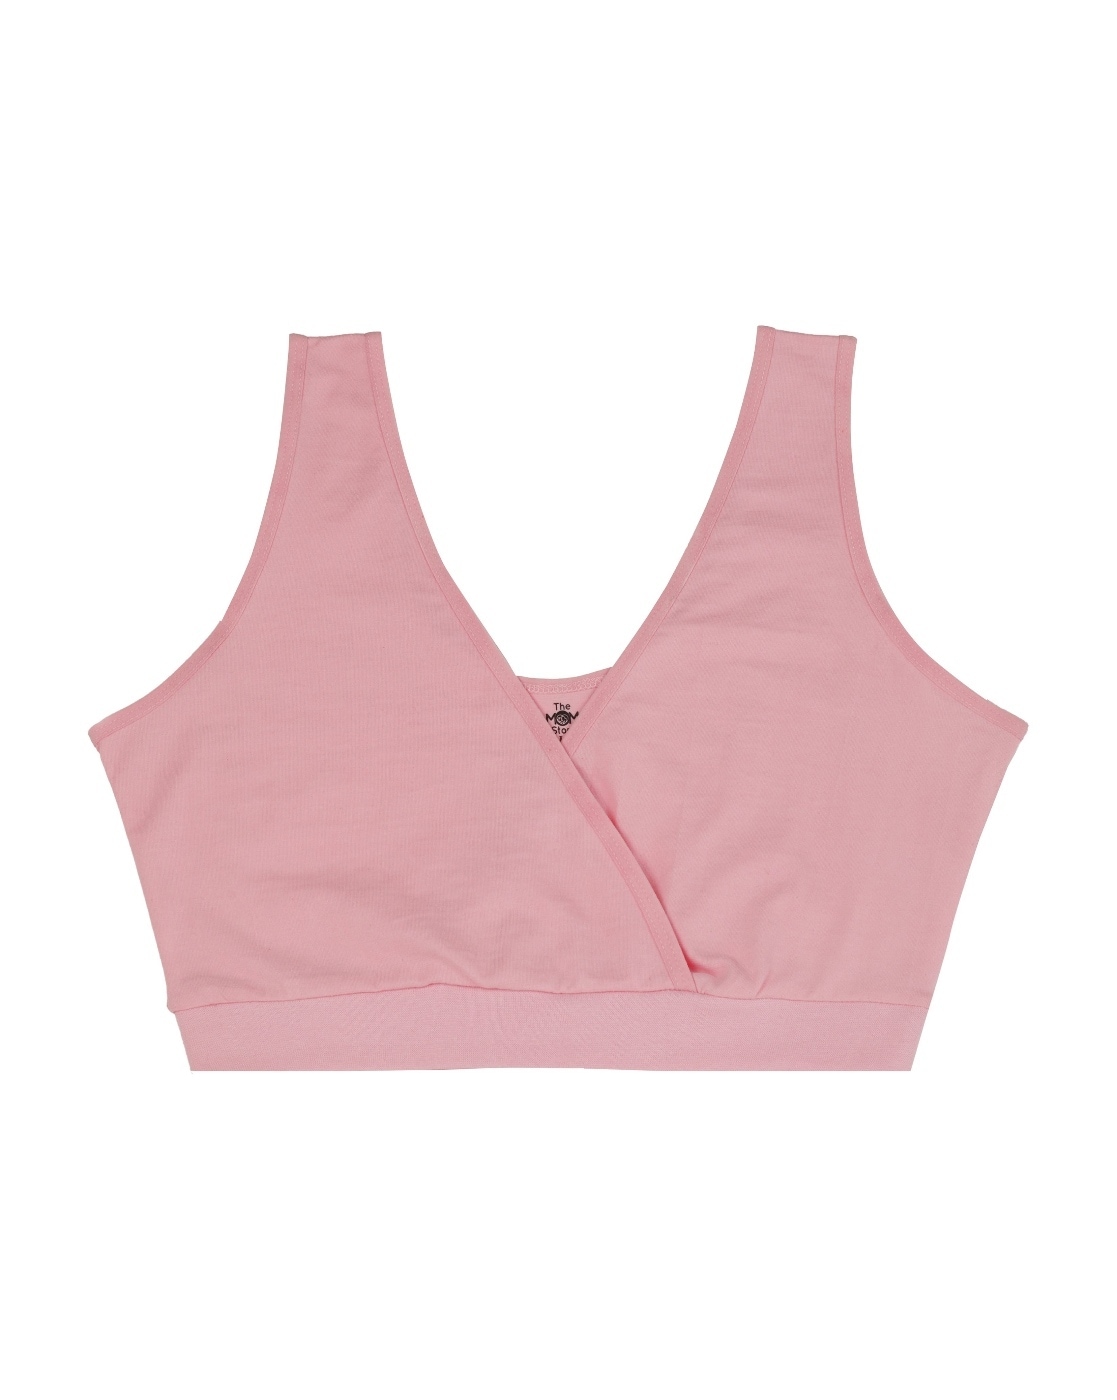 Buy Pink, Blue Bras for Women by THE MOM STORE Online